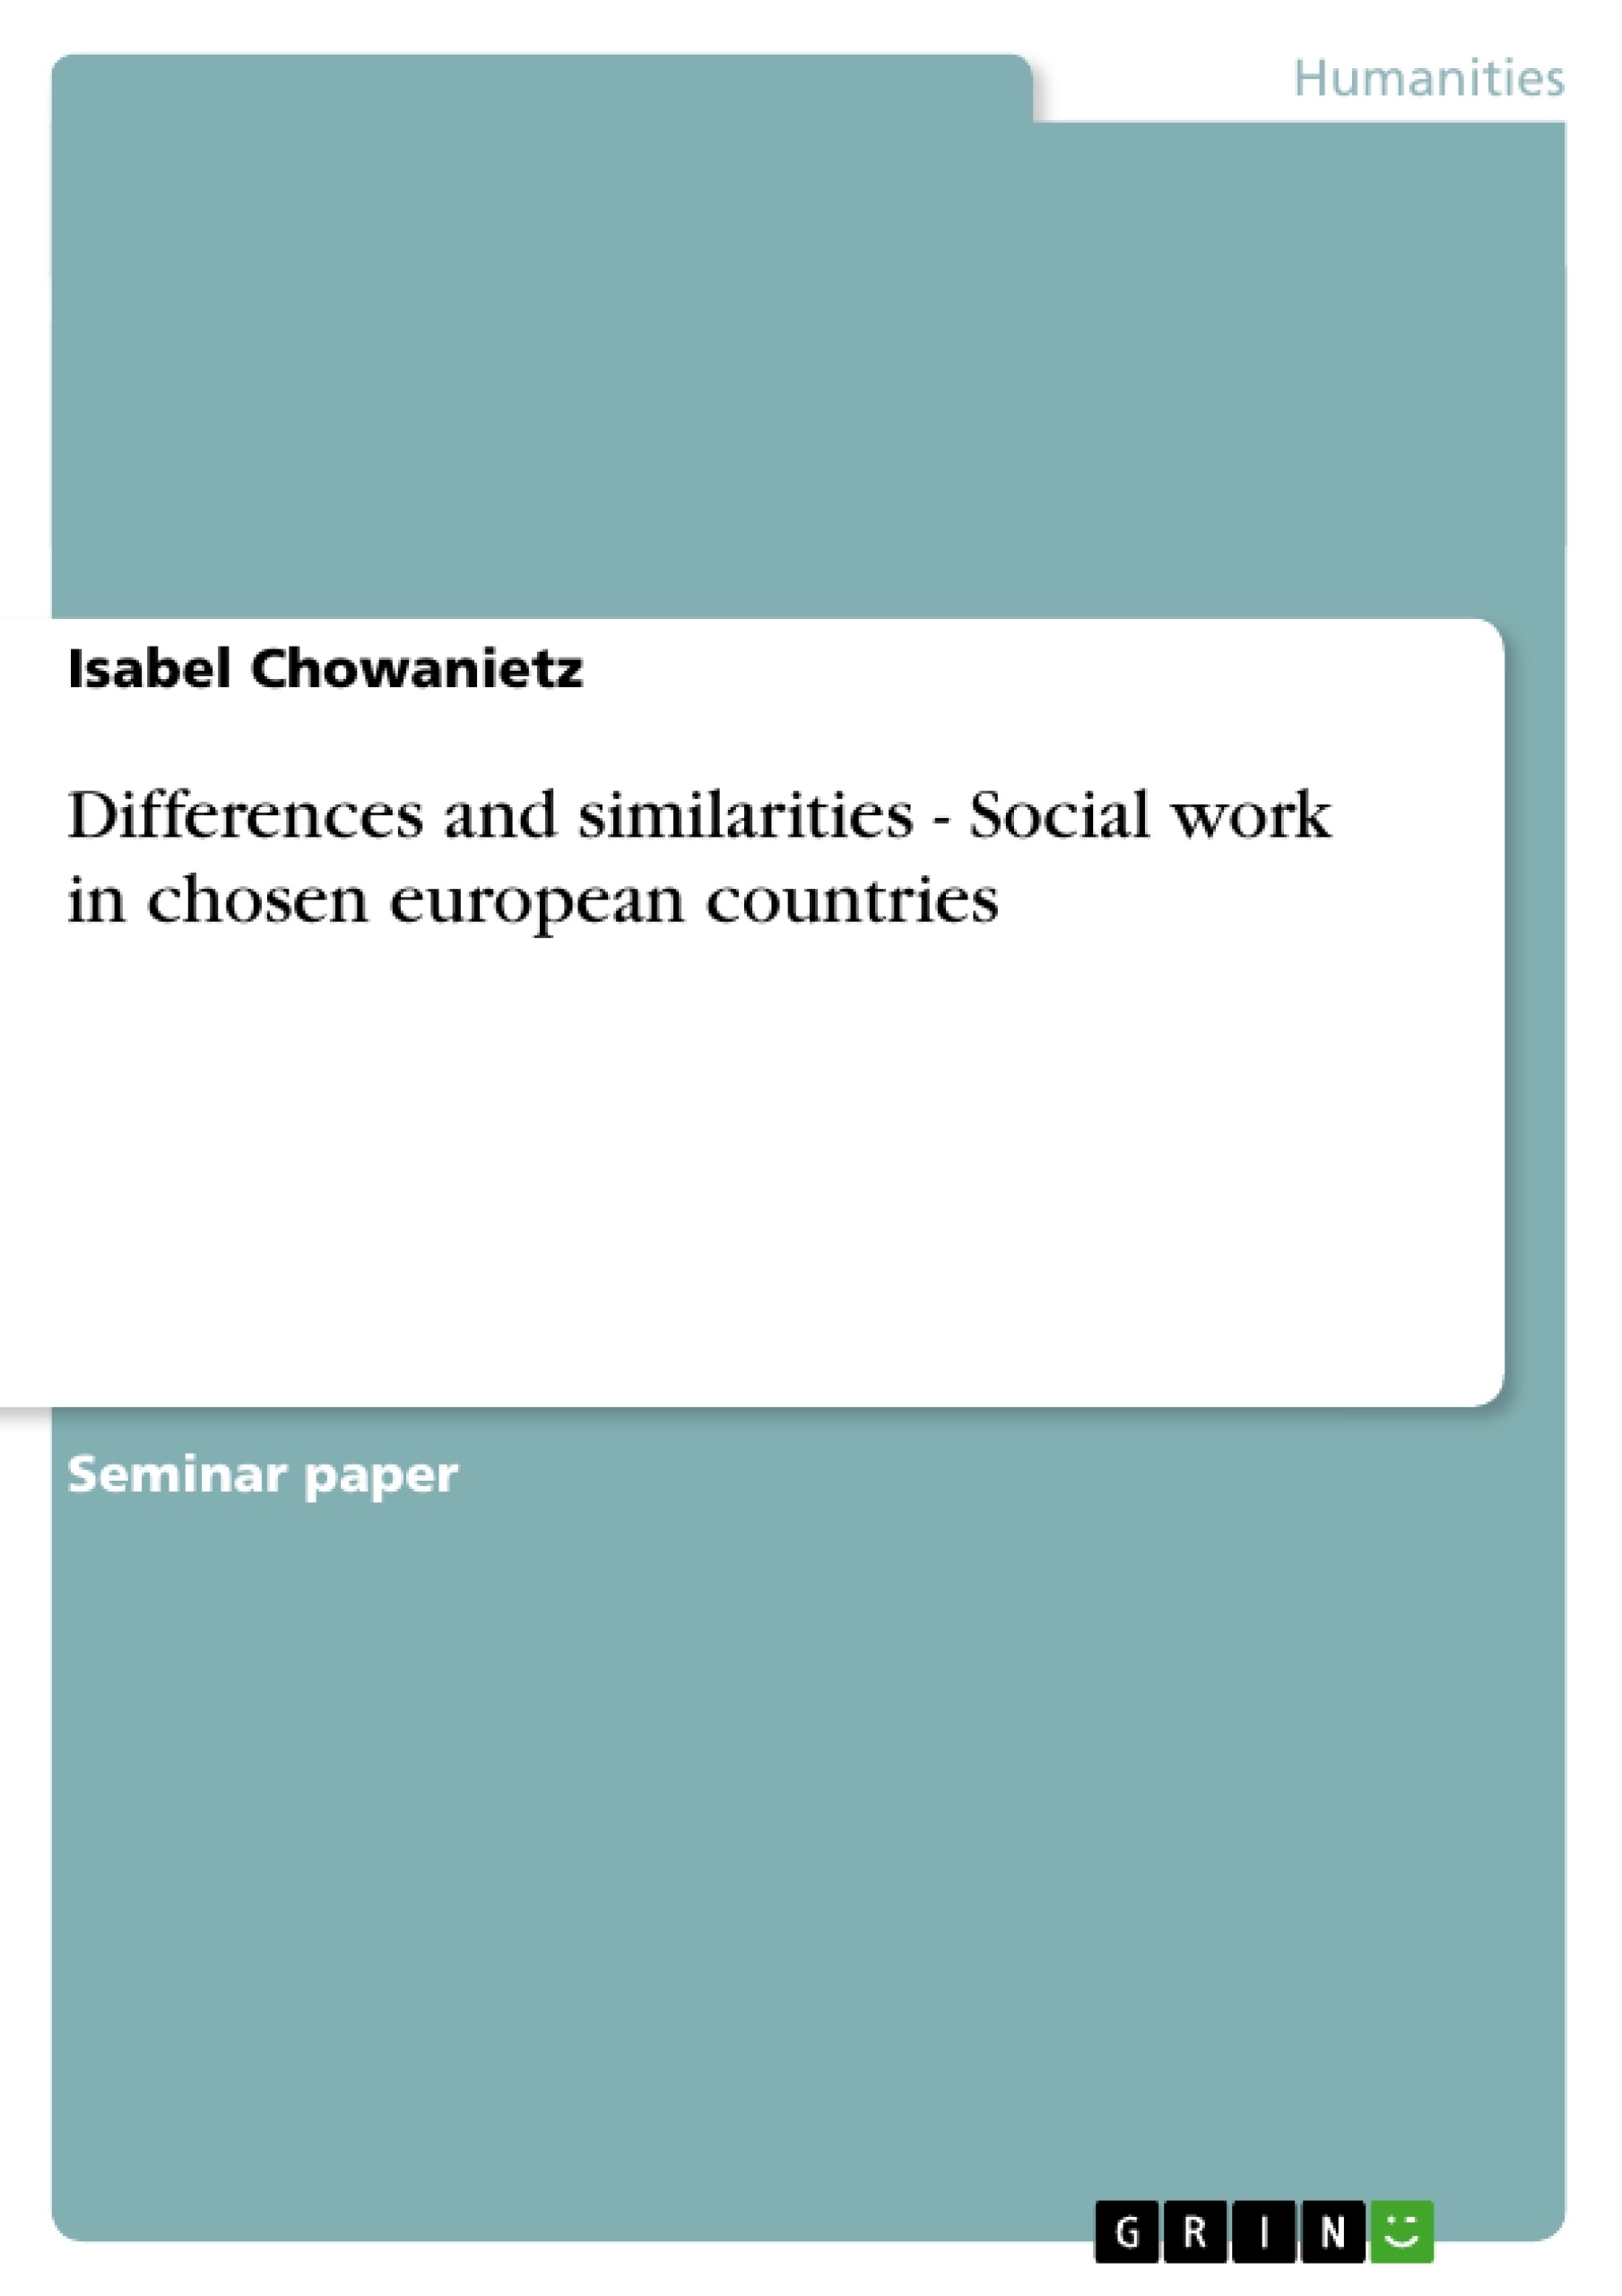 Título: Differences and similarities - Social work in chosen european countries